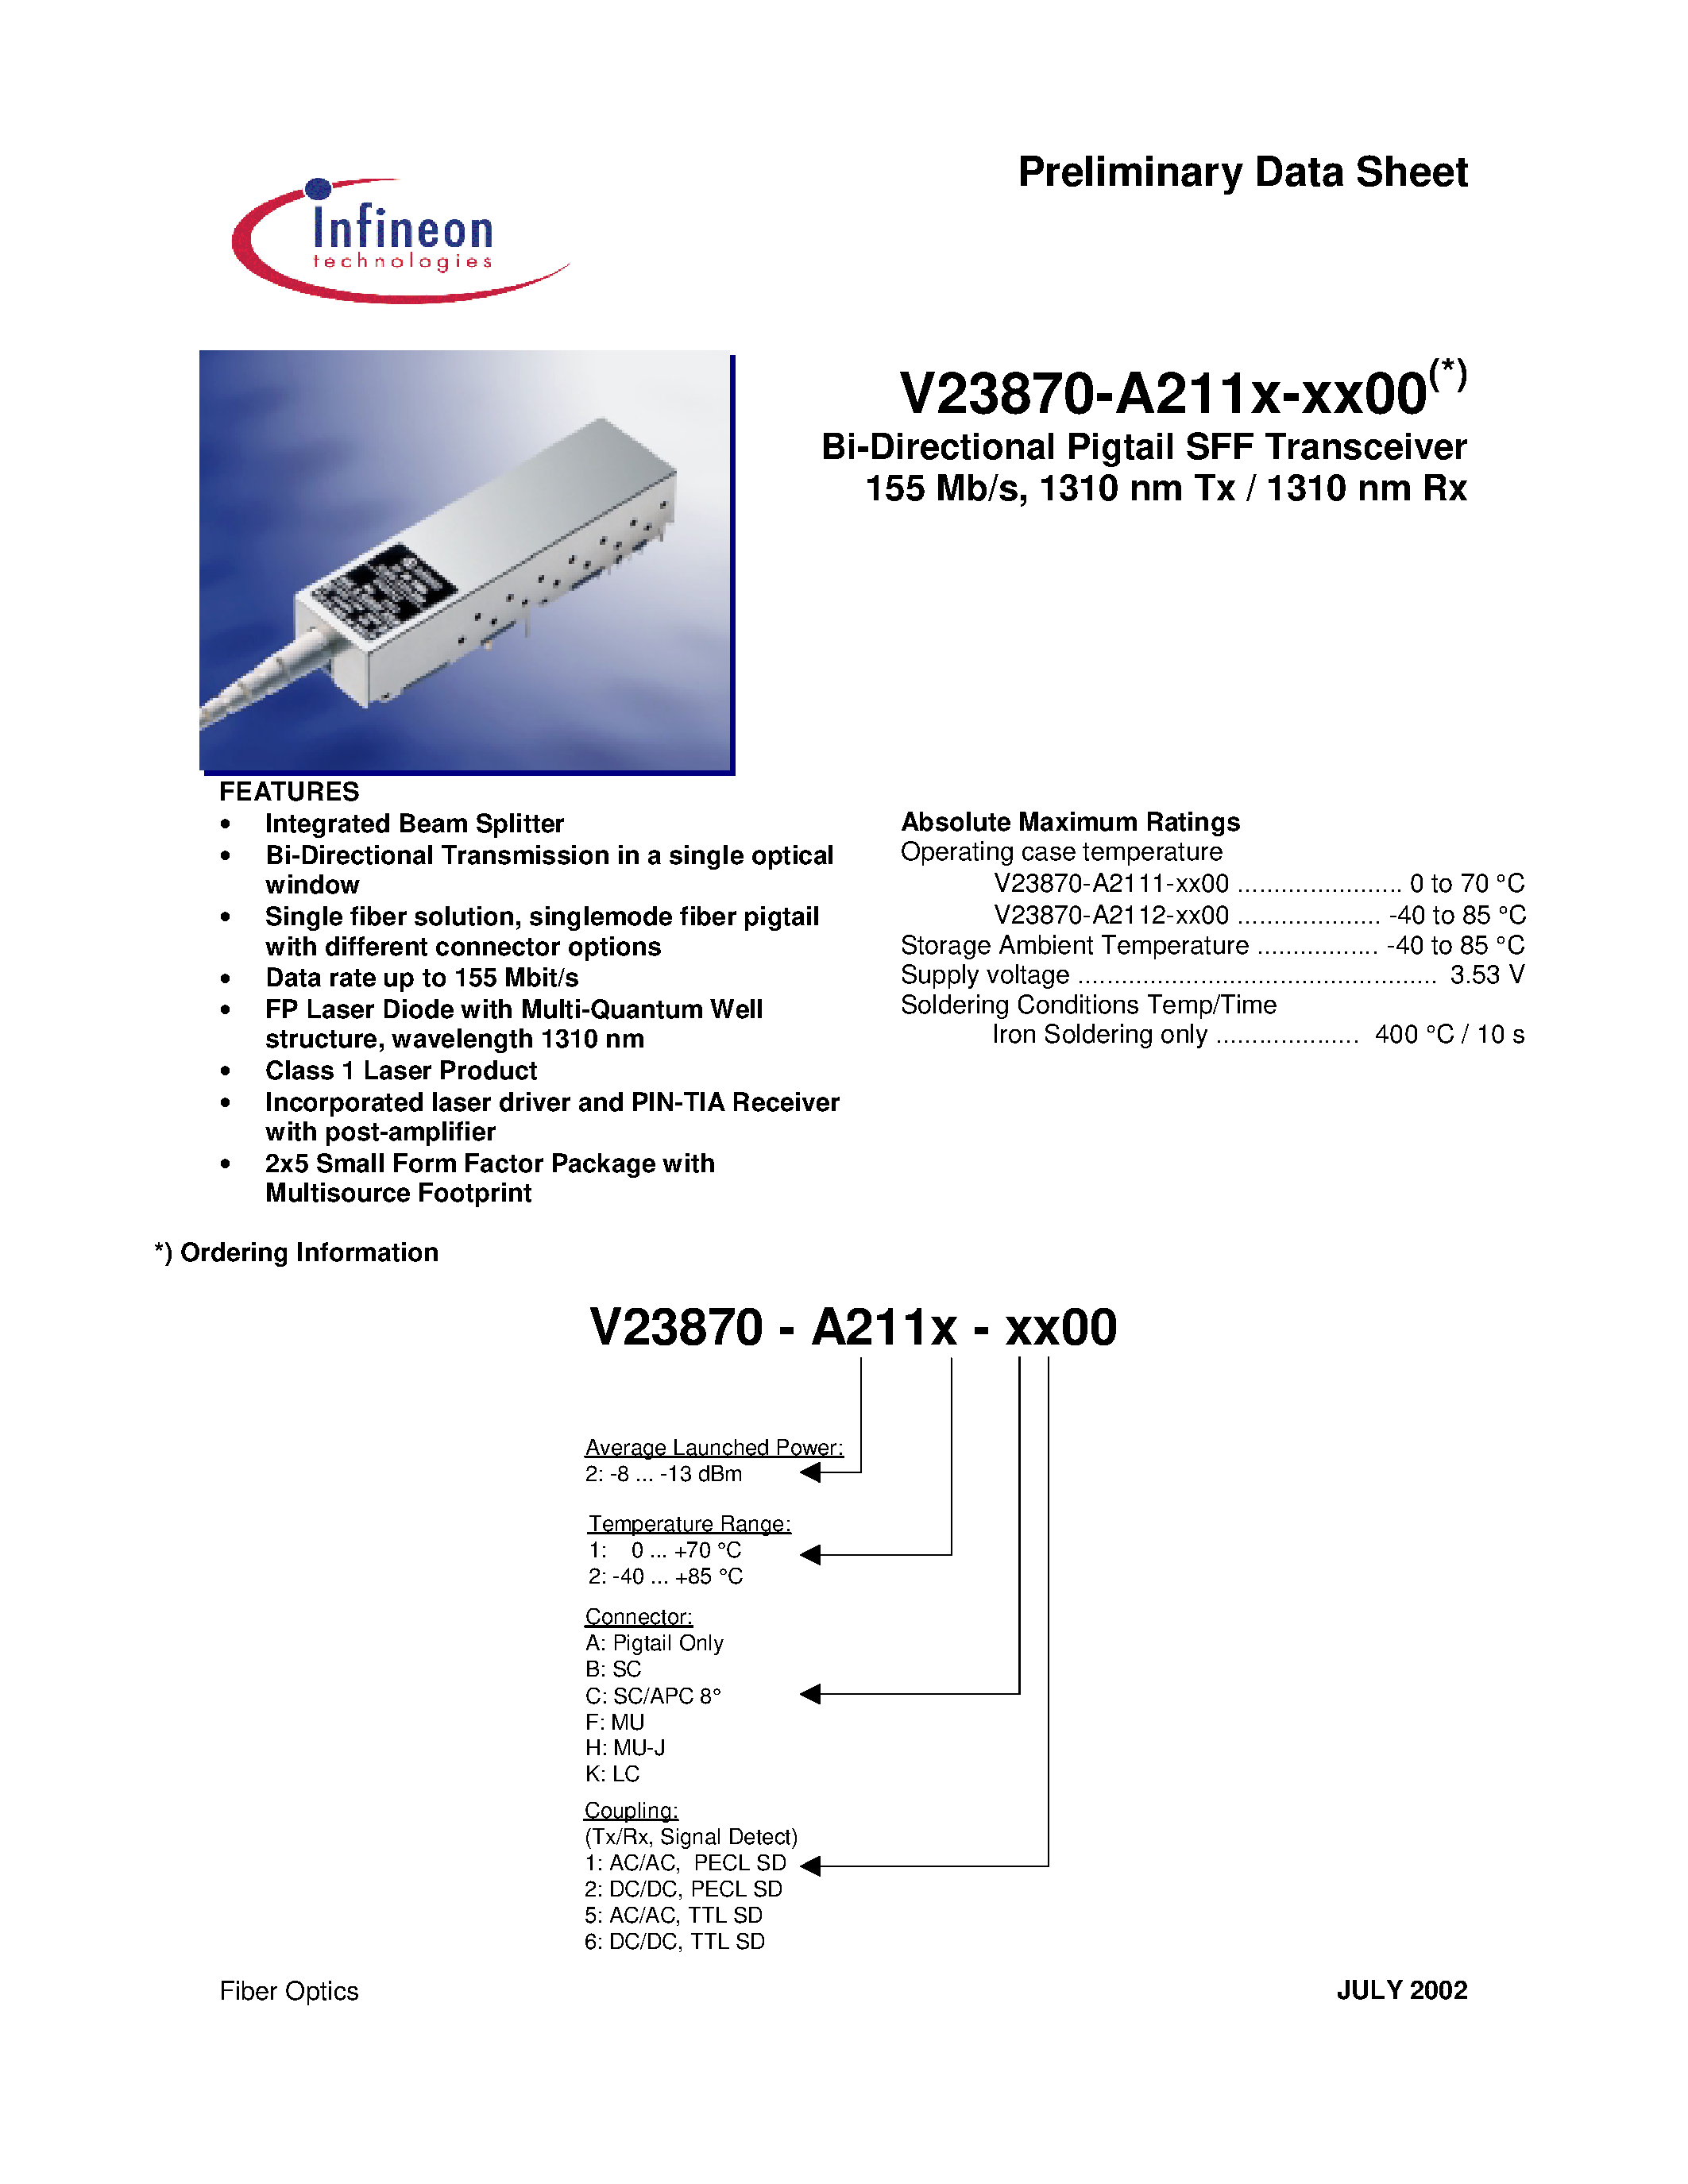 Datasheet V23870-A2111-H200 - Bi-Directional Pigtail SFF Transceiver 155 Mb/s/ 1310 nm Tx / 1310 nm Rx page 1